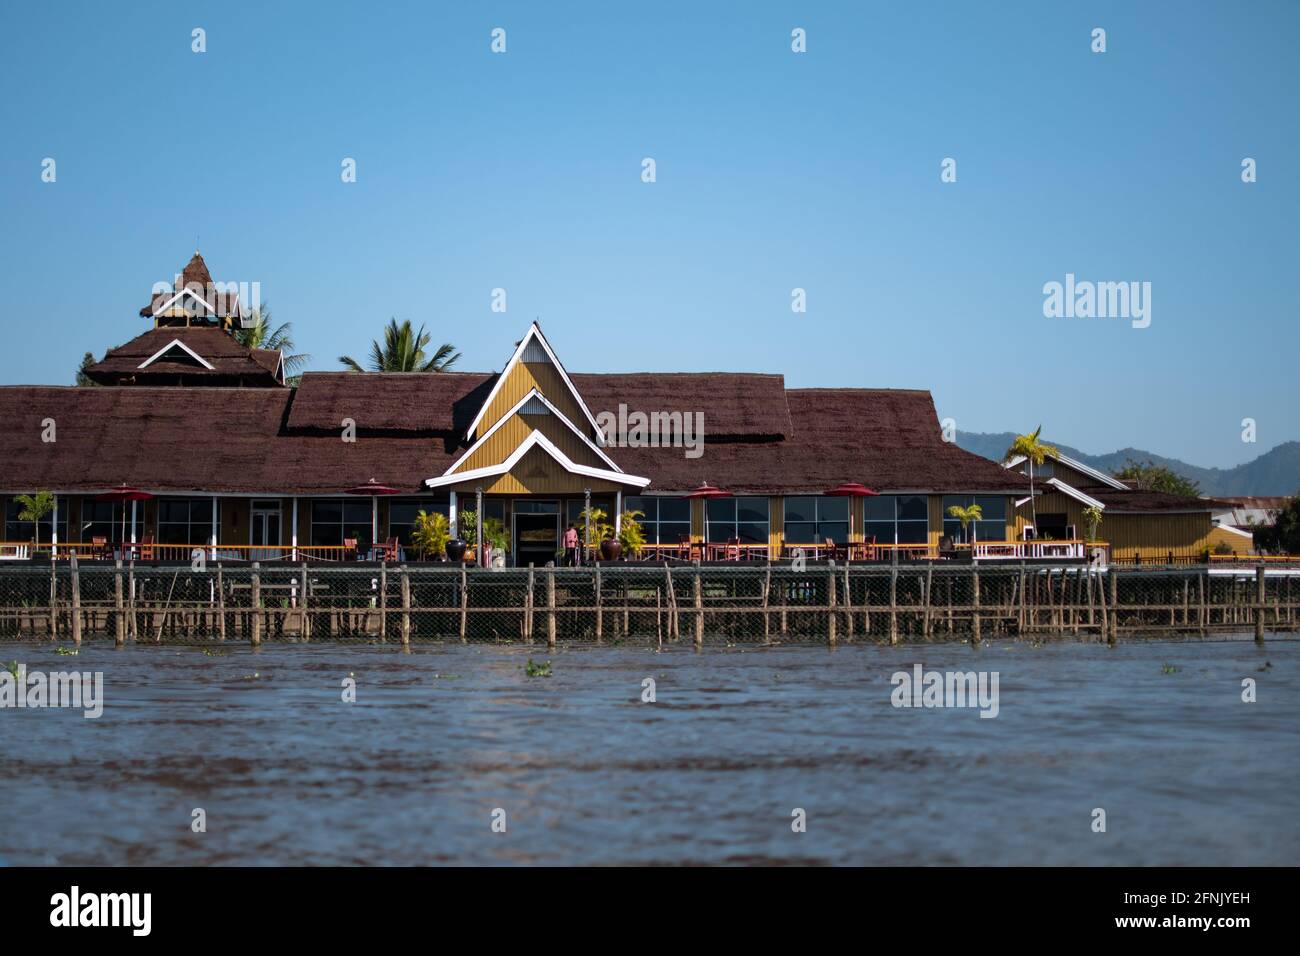 A big yellow elevated building on the riverside of the canals at Inle Lake, Nyaung Shwe, Shan state, Myanmar Stock Photo